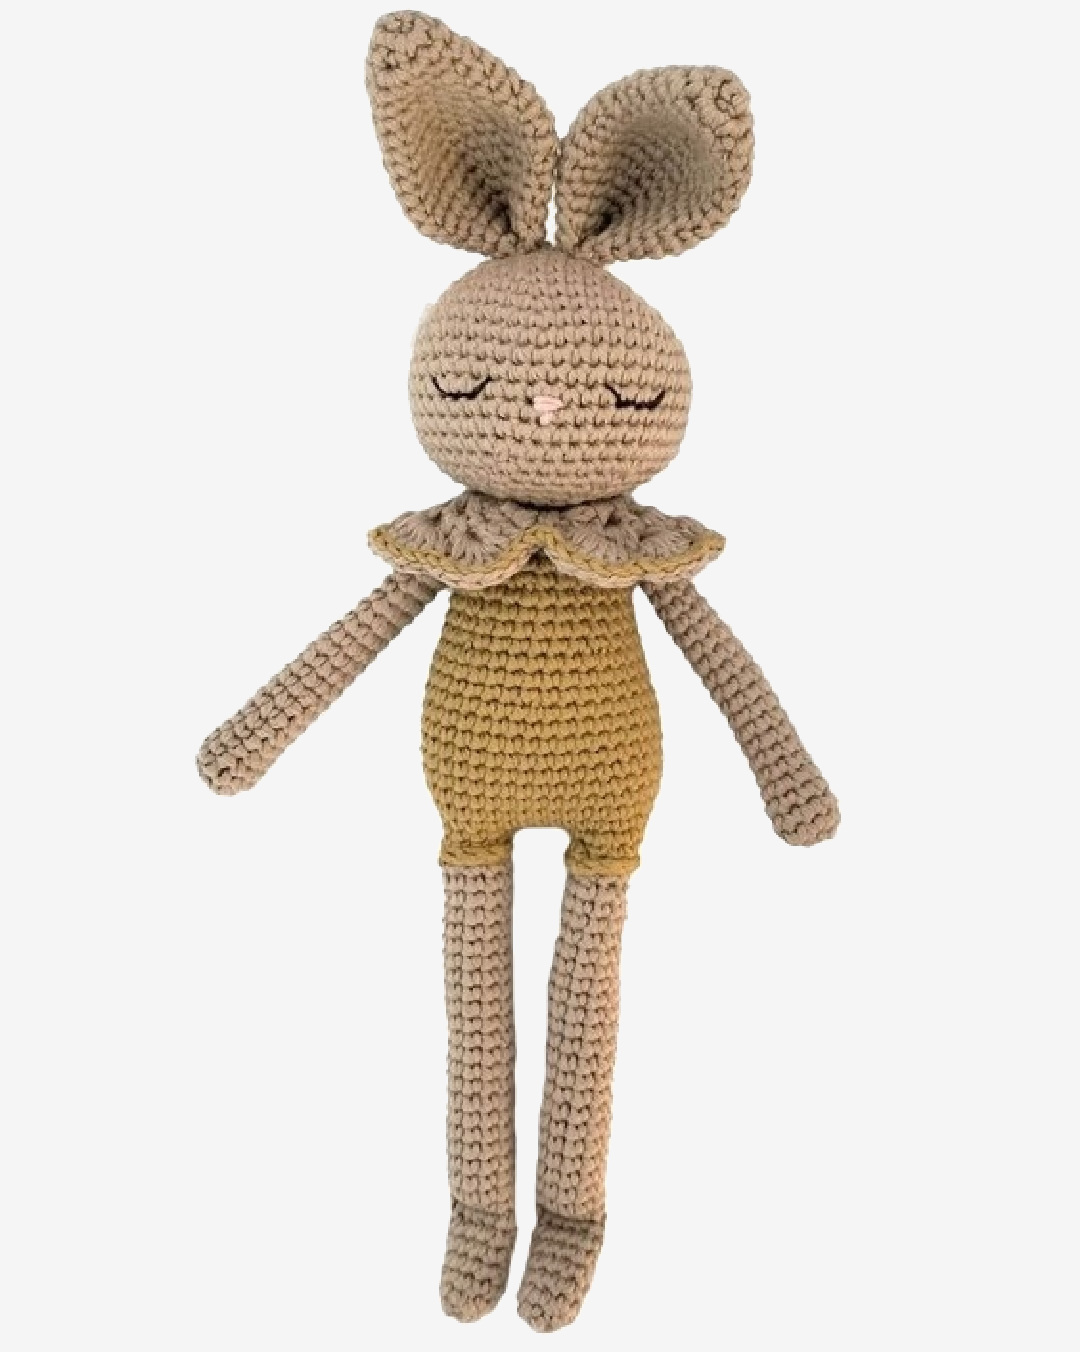 Knitted bunny soft toy called Bianca